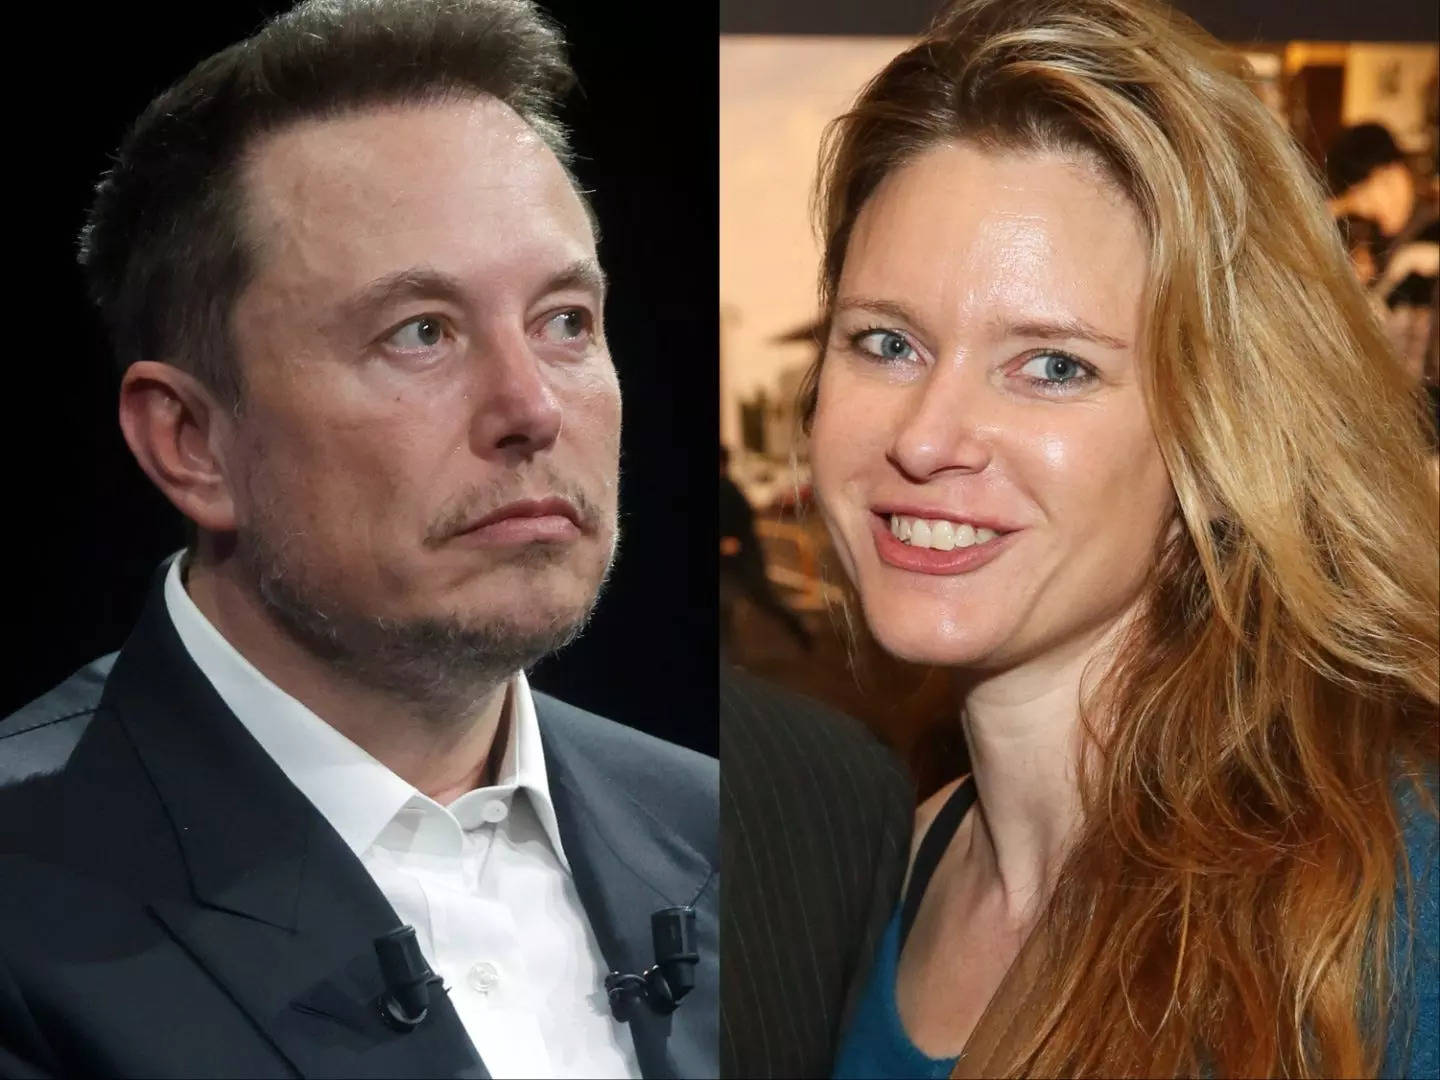 Elon Musk met his first wife, Justine, when he was 19. She's the mother ...